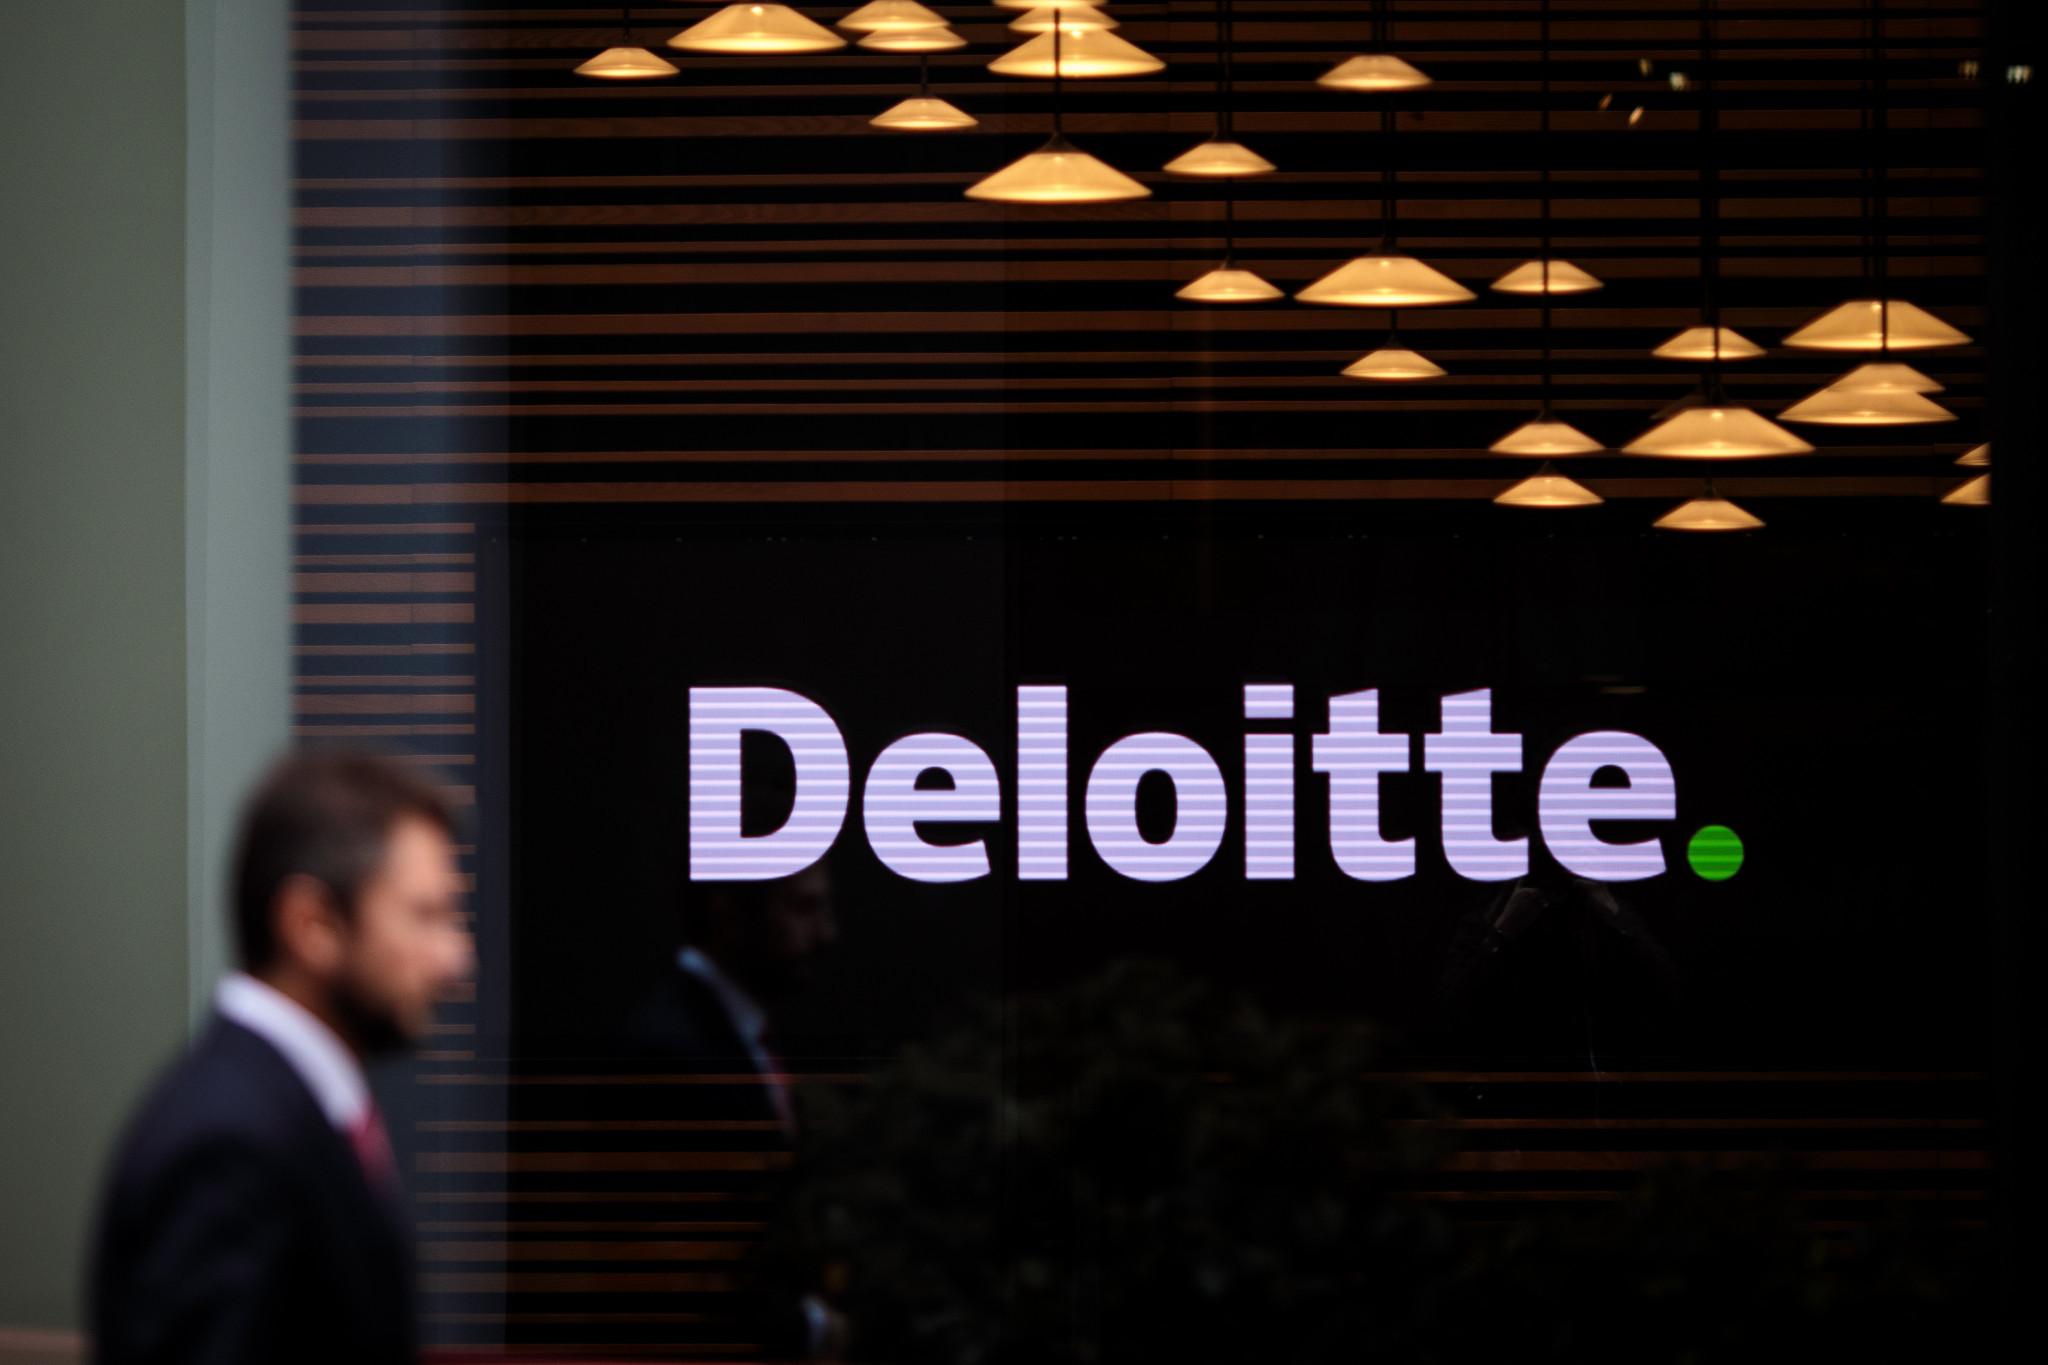 Deloitte has signed up to The Olympic Partner sponsorship programme ©Getty Images